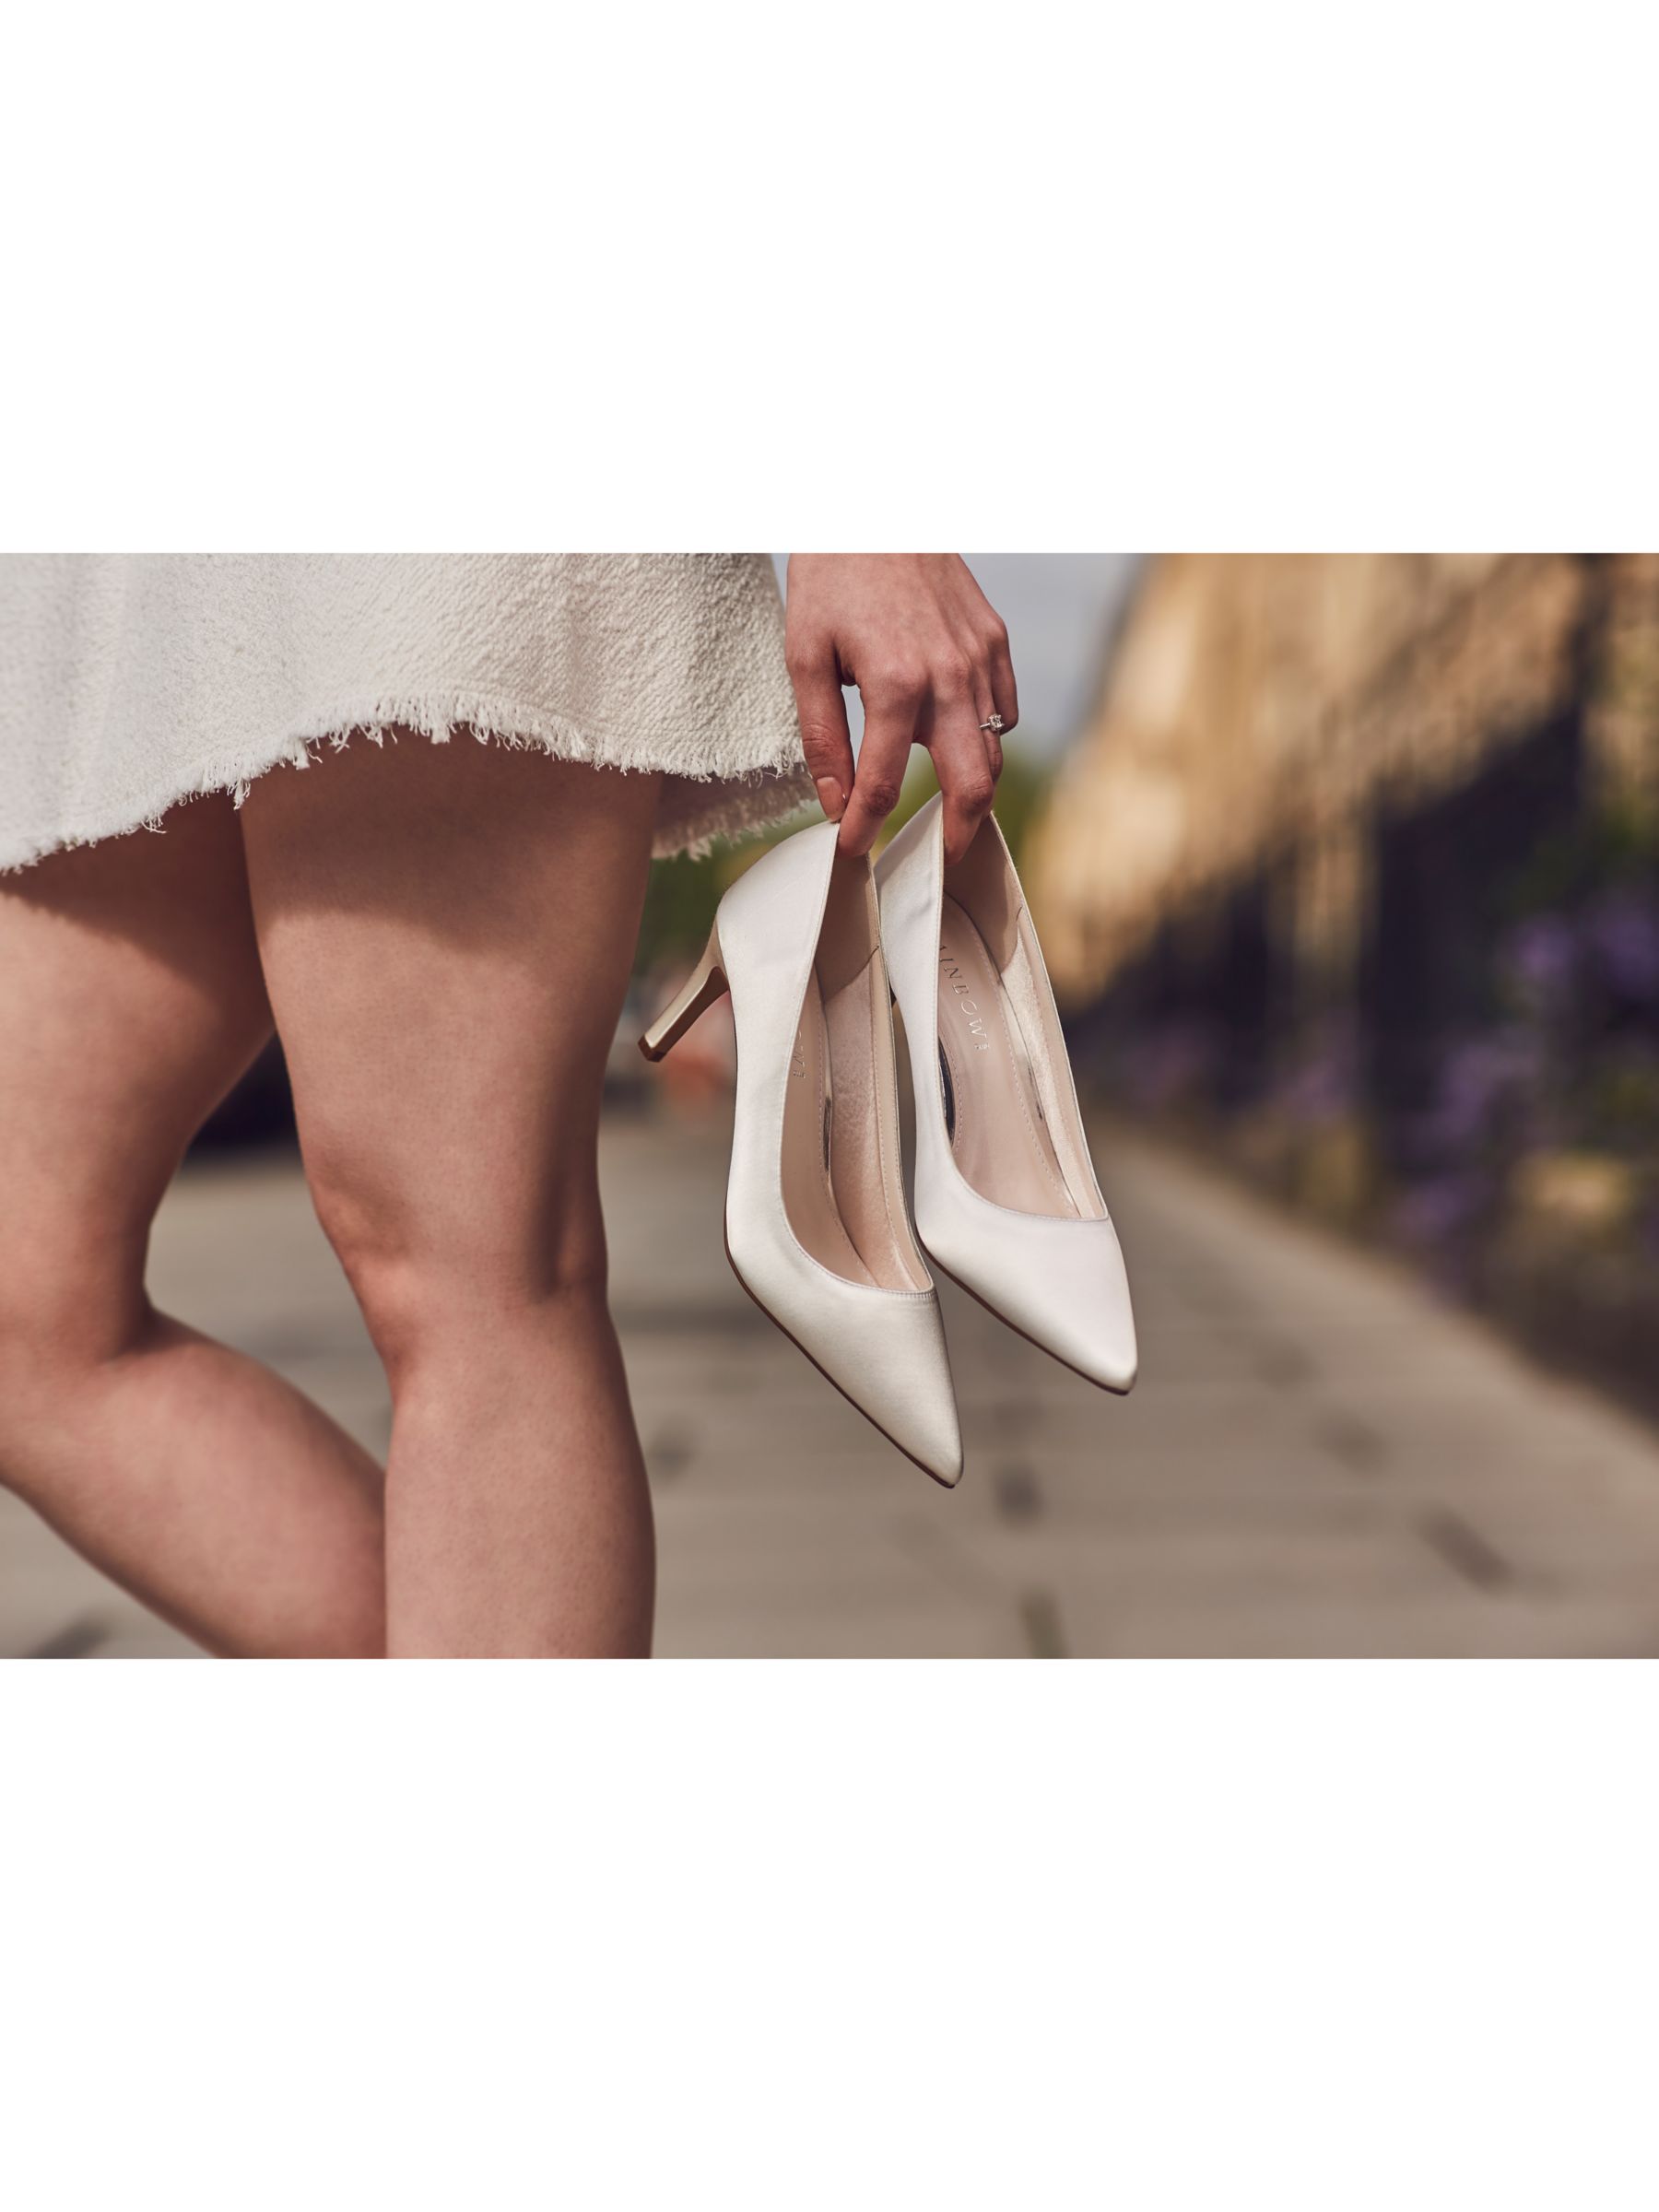 Buy Rainbow Club Morgan Satin Court Shoes, Ivory Online at johnlewis.com